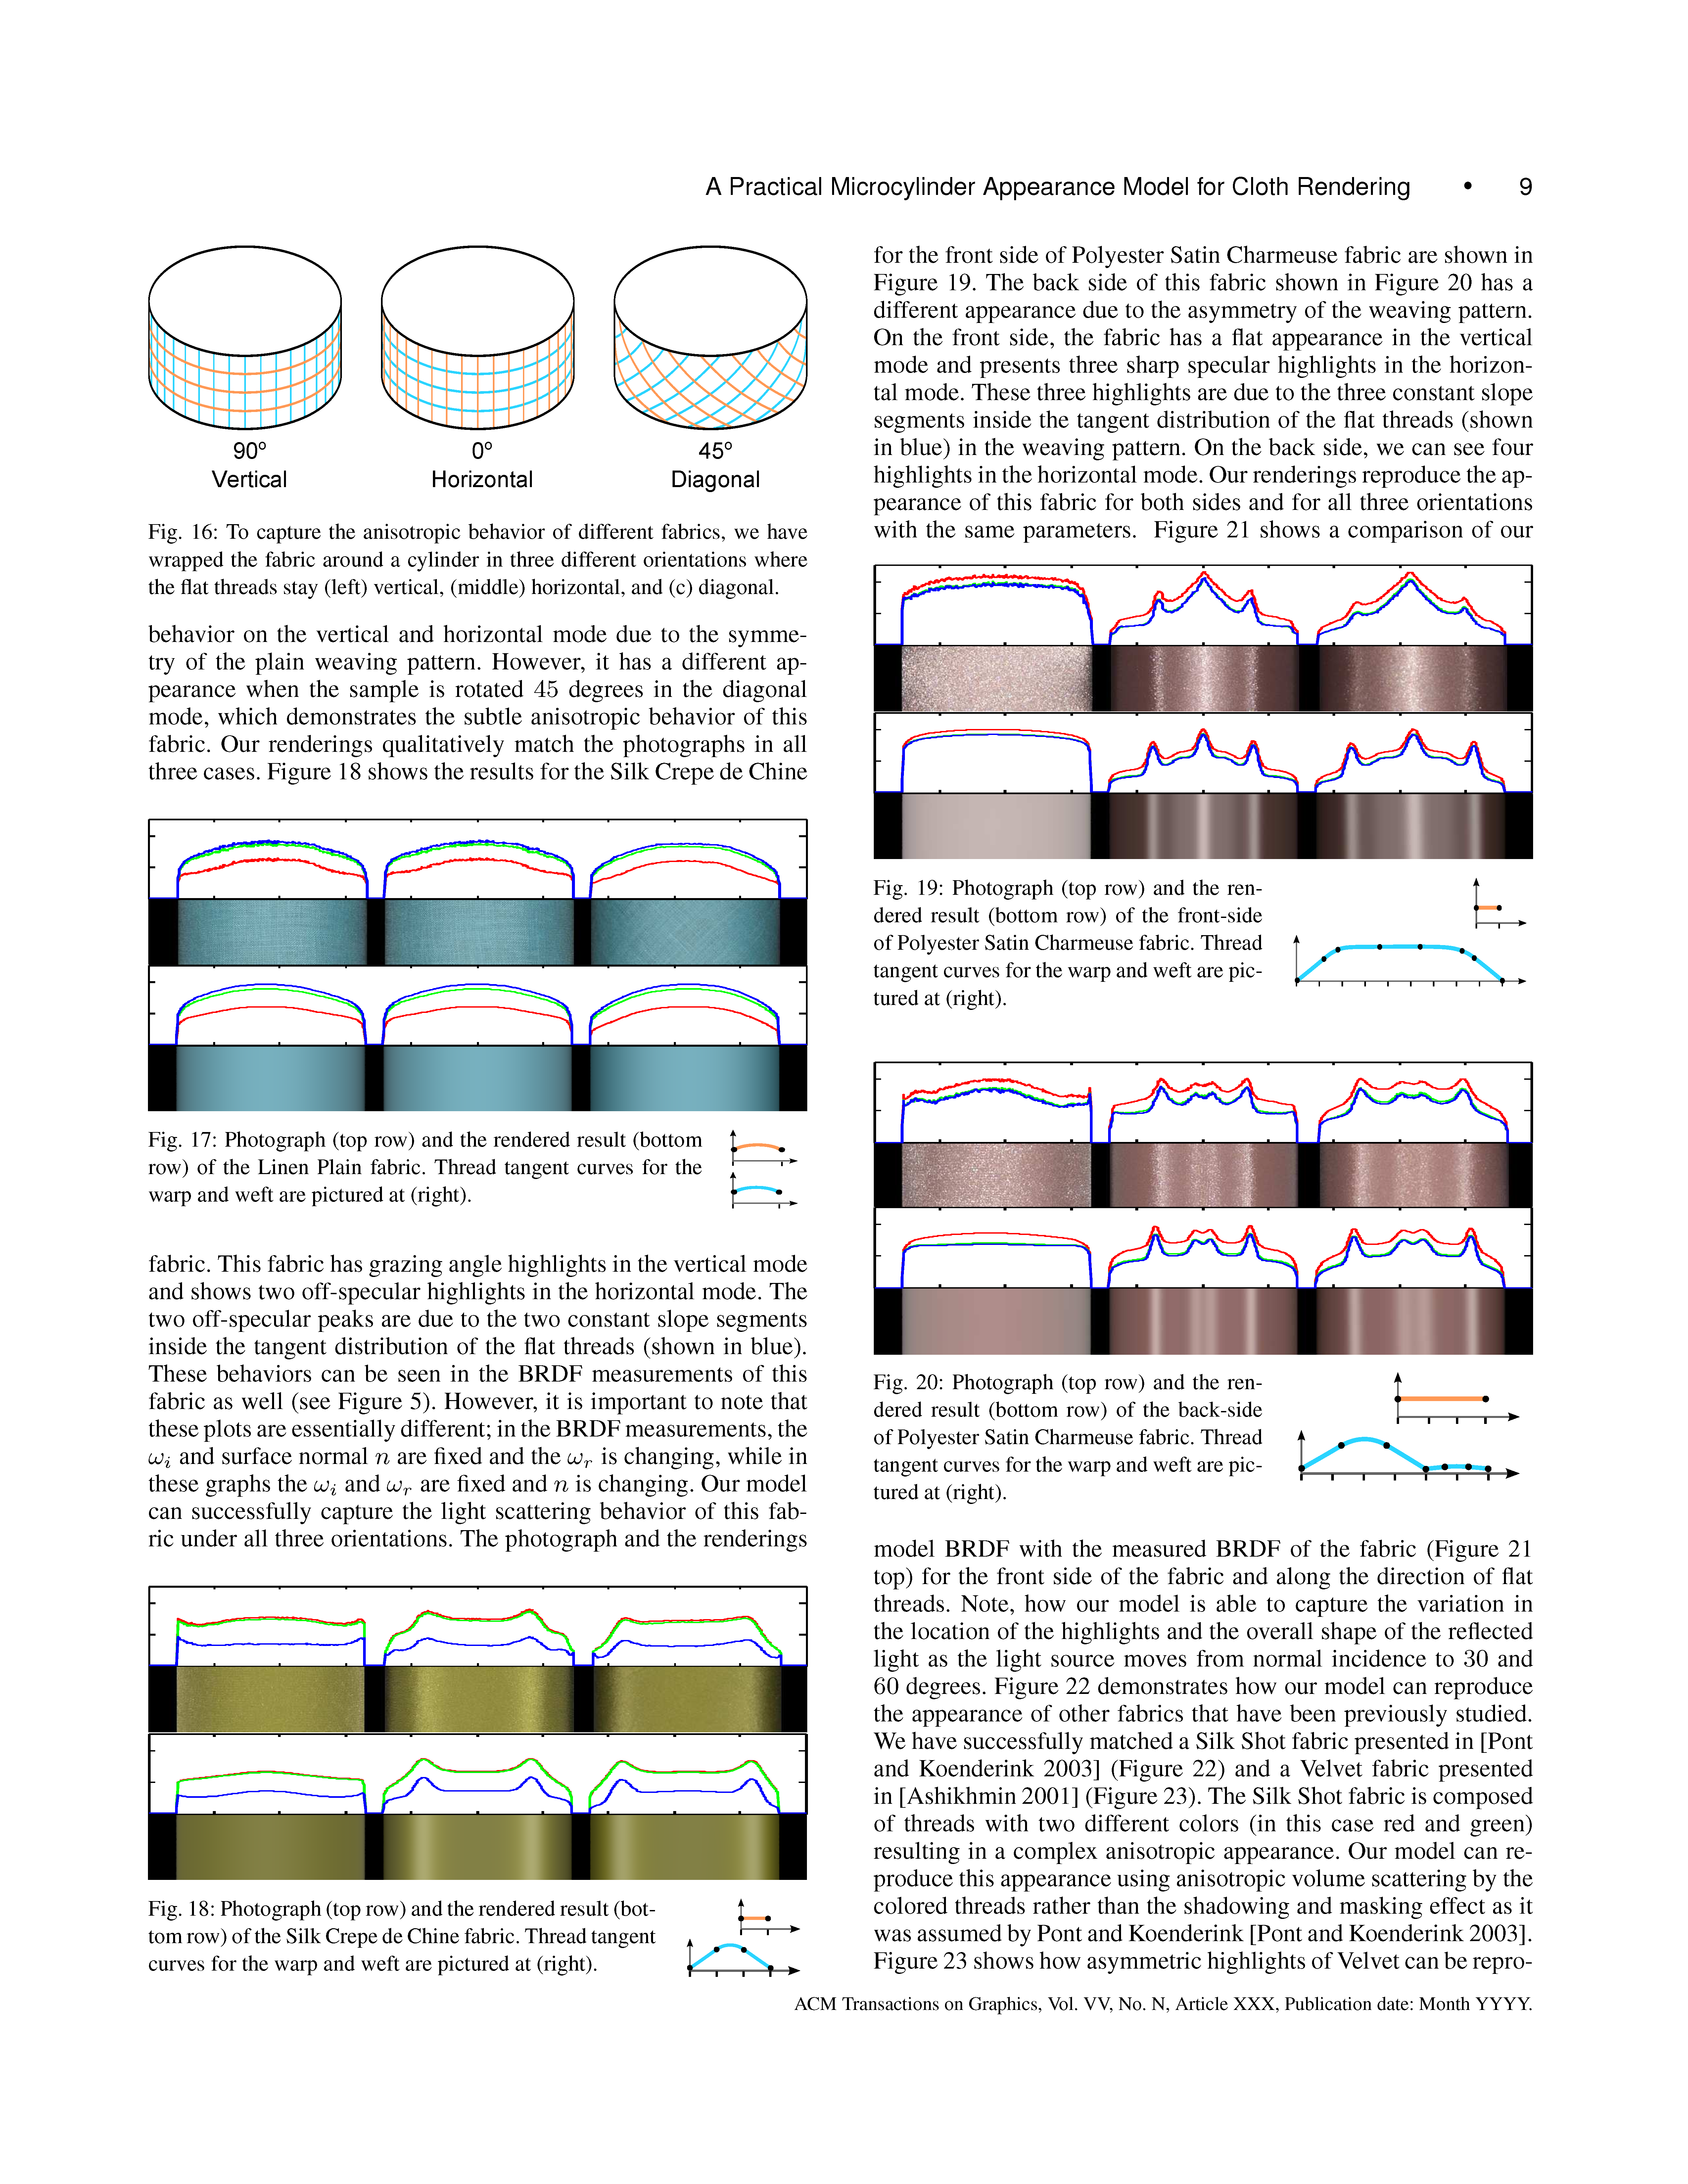 A Practical Microcylinder Appearance Model for Cloth Rendering Page 9